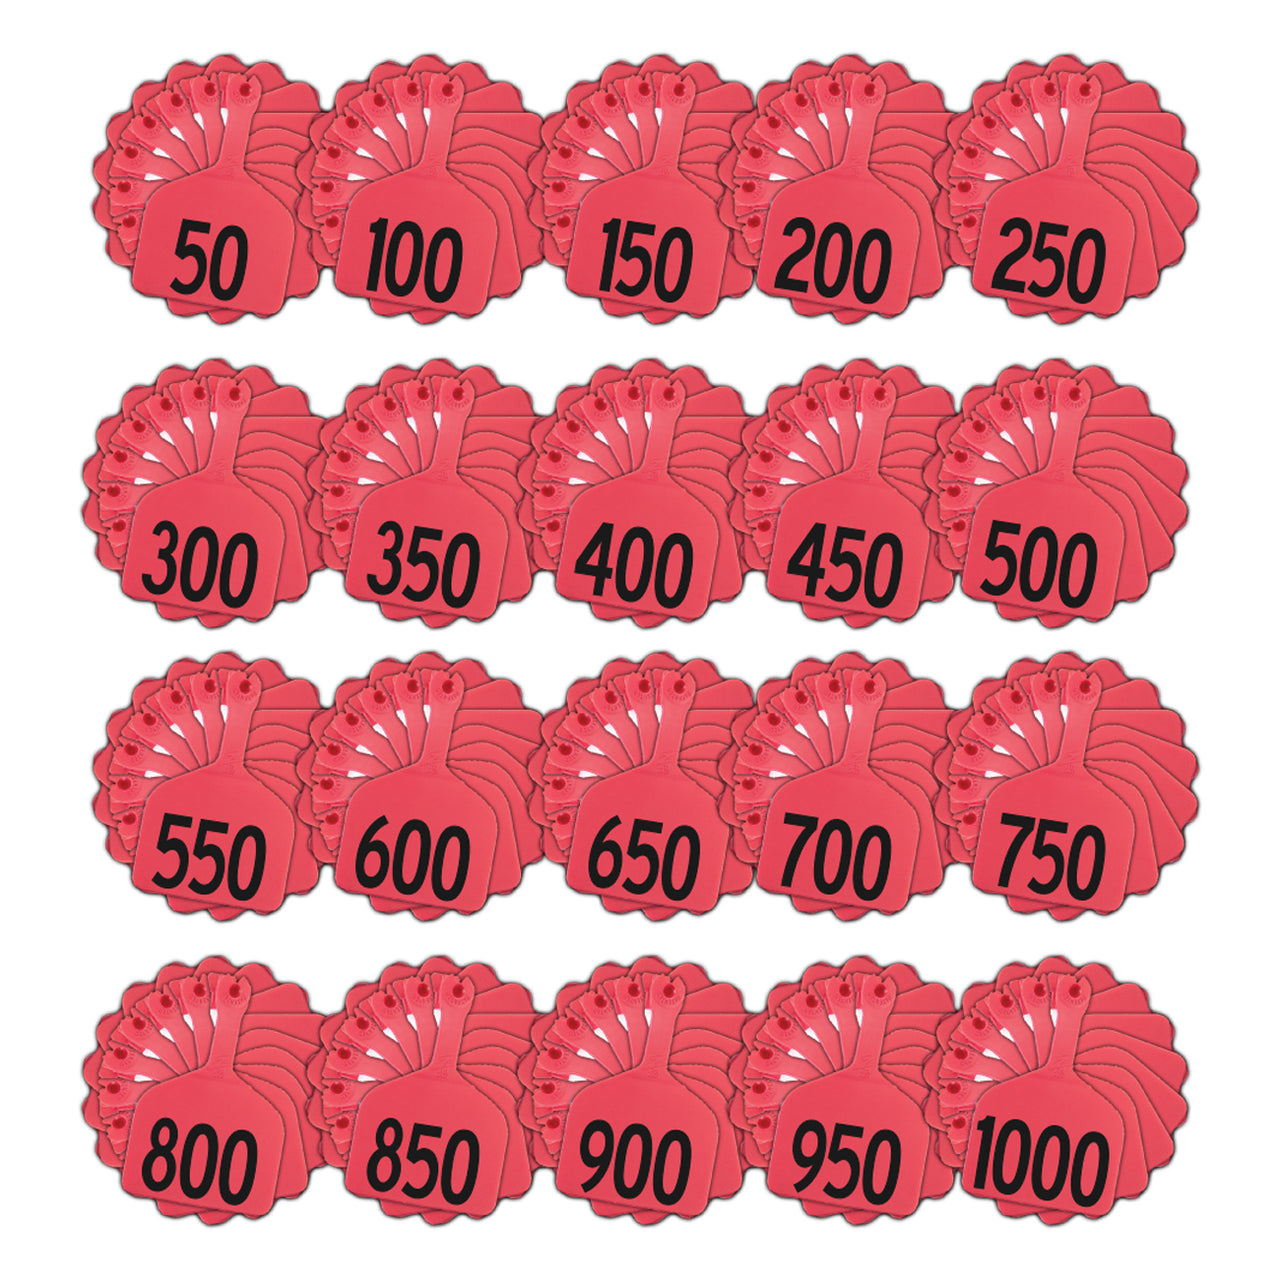 Z Tags 1 Piece Feedlot Stamped 1-1000 In Bundles Of 50 (Red) - Pre-Printed Tags Z Tags - Canada